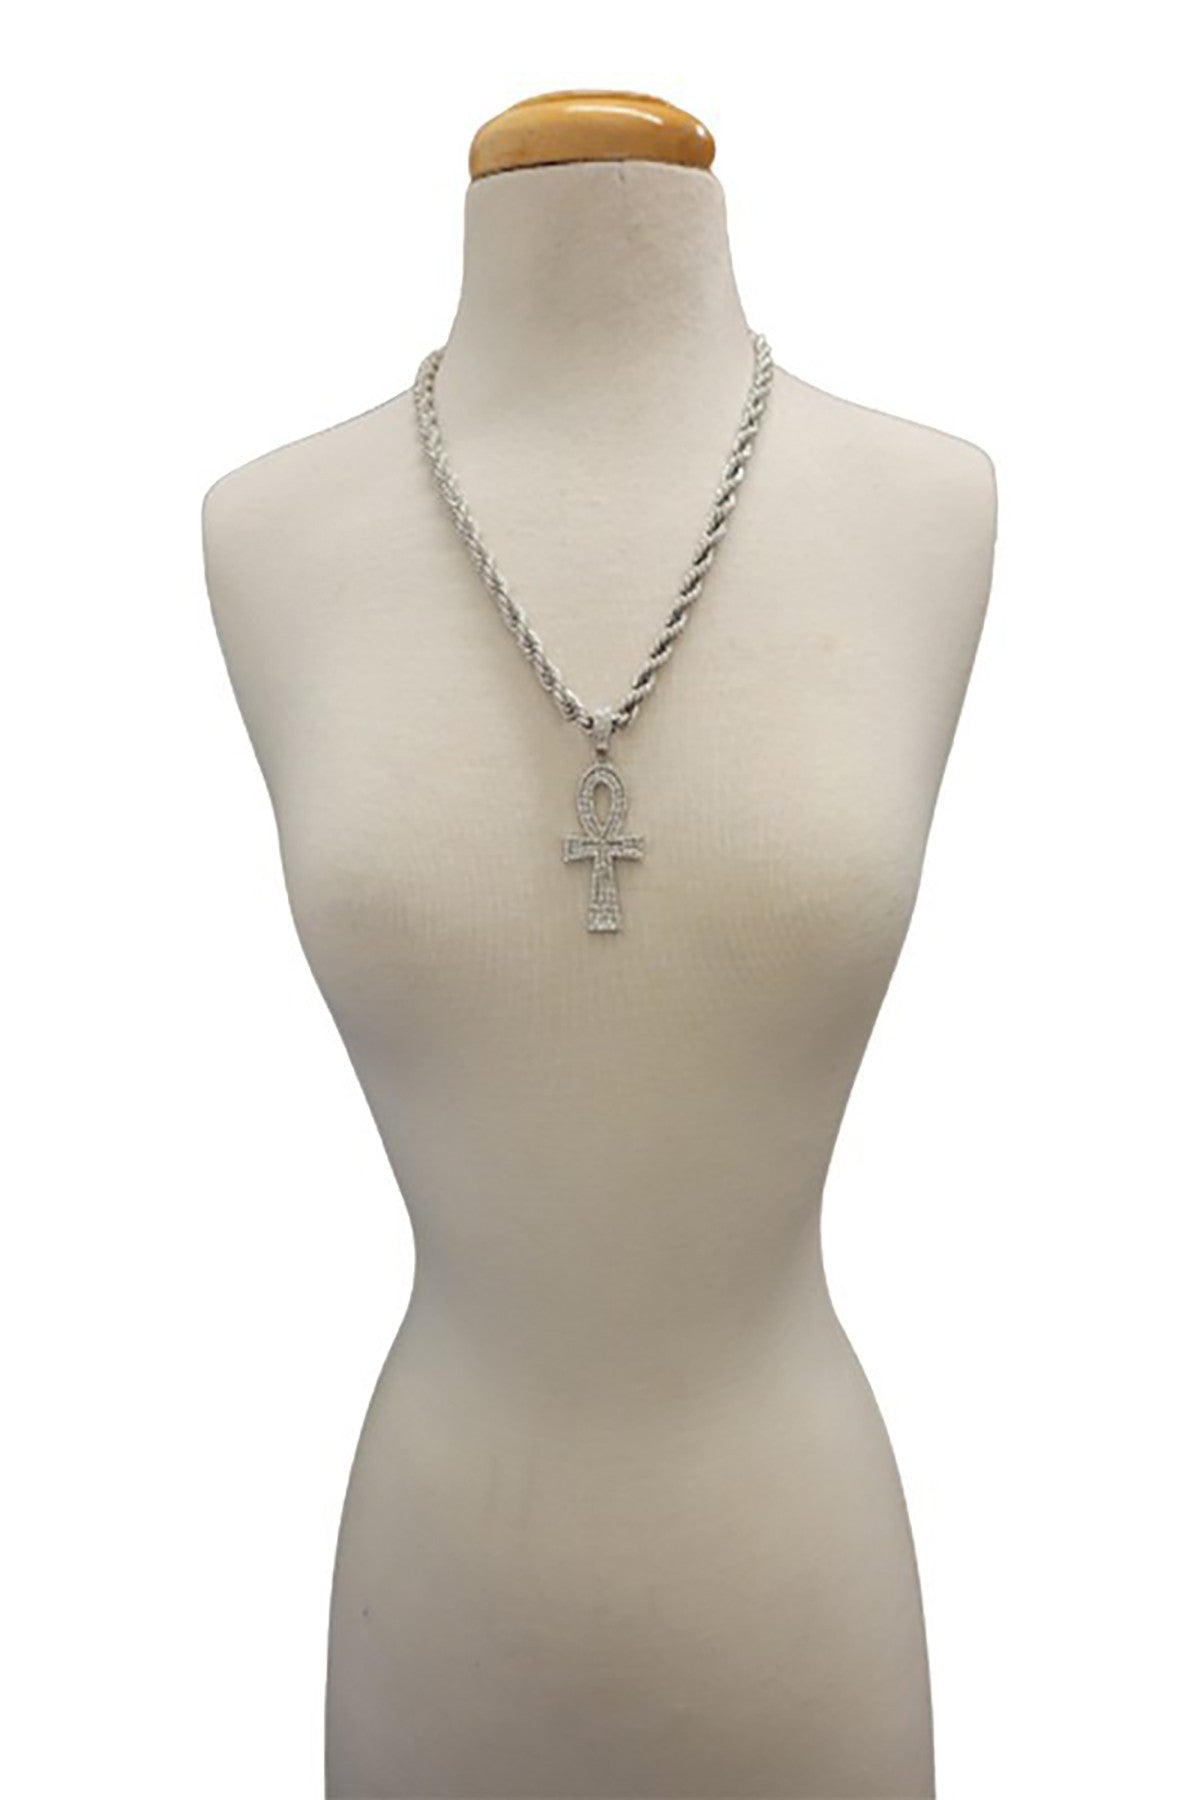 HIP HOP ICED OUT ANKH CROSS PENDANT ROPE CHAIN